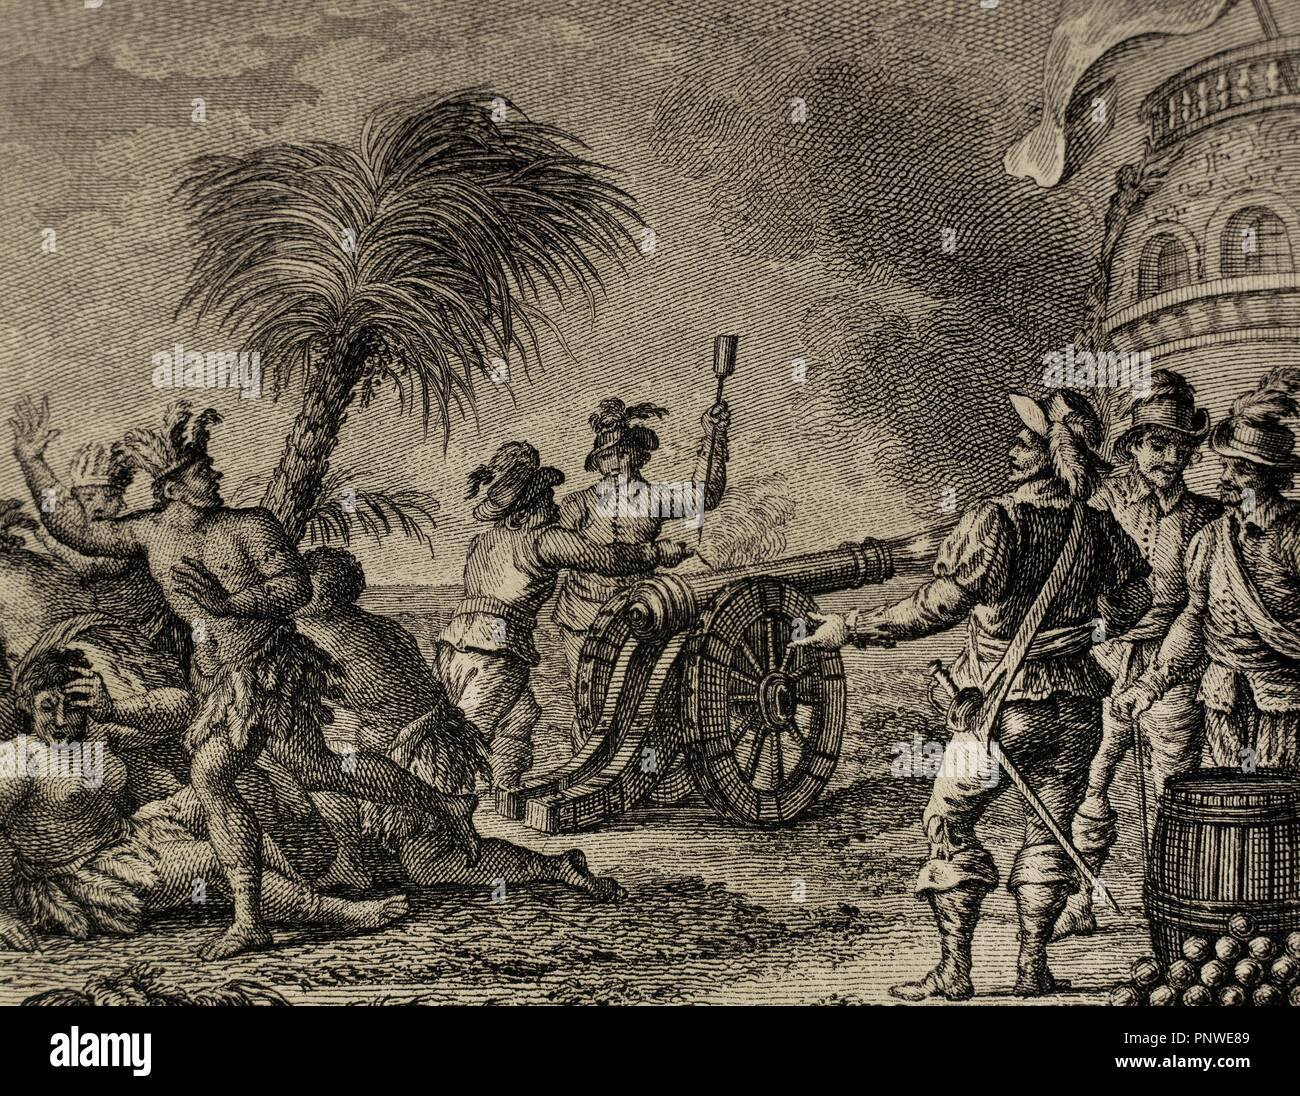 Tierra del Fuego. The ruler of the natives of the Hornos island, along with the Dutch Willem Cornelisz Schouten and Jacob Le Maire, is surprised by the firing of a cannon. Engraving, 1807. Stock Photo